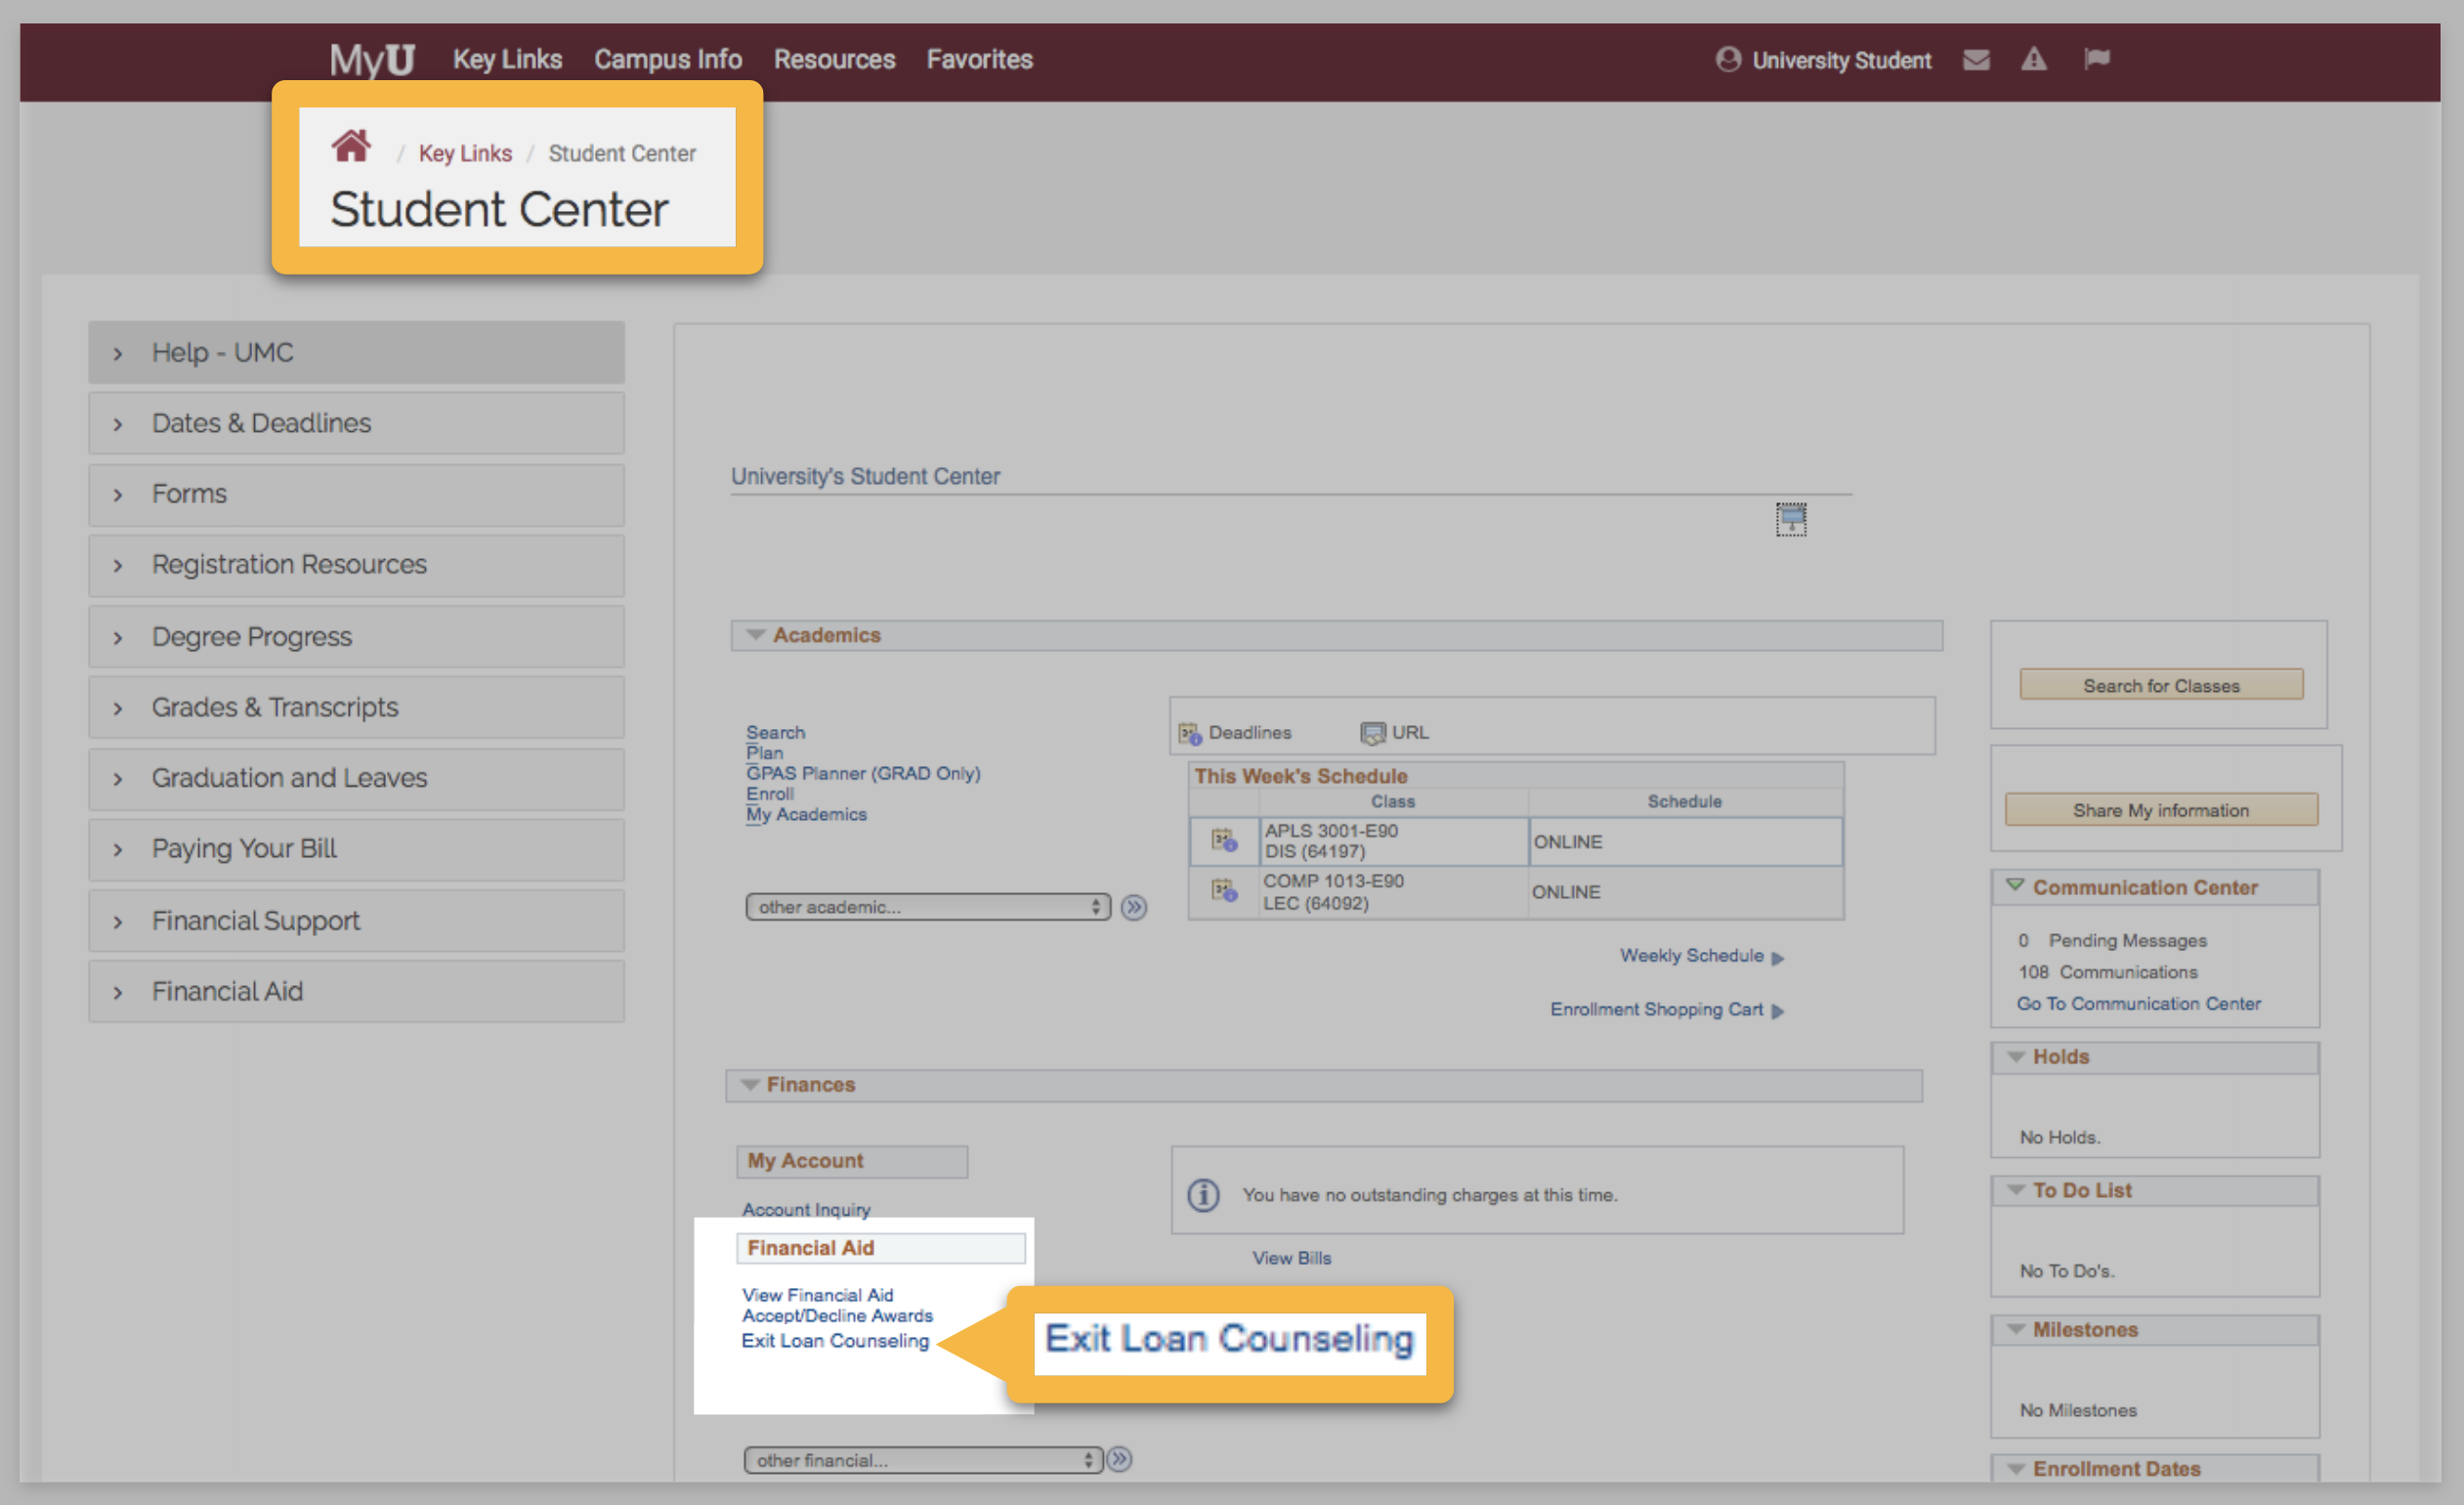 Screenshot of MyU that shows the Student Center. The financial aid section is highlighted along with the “Exit Loan Counseling” link below it.